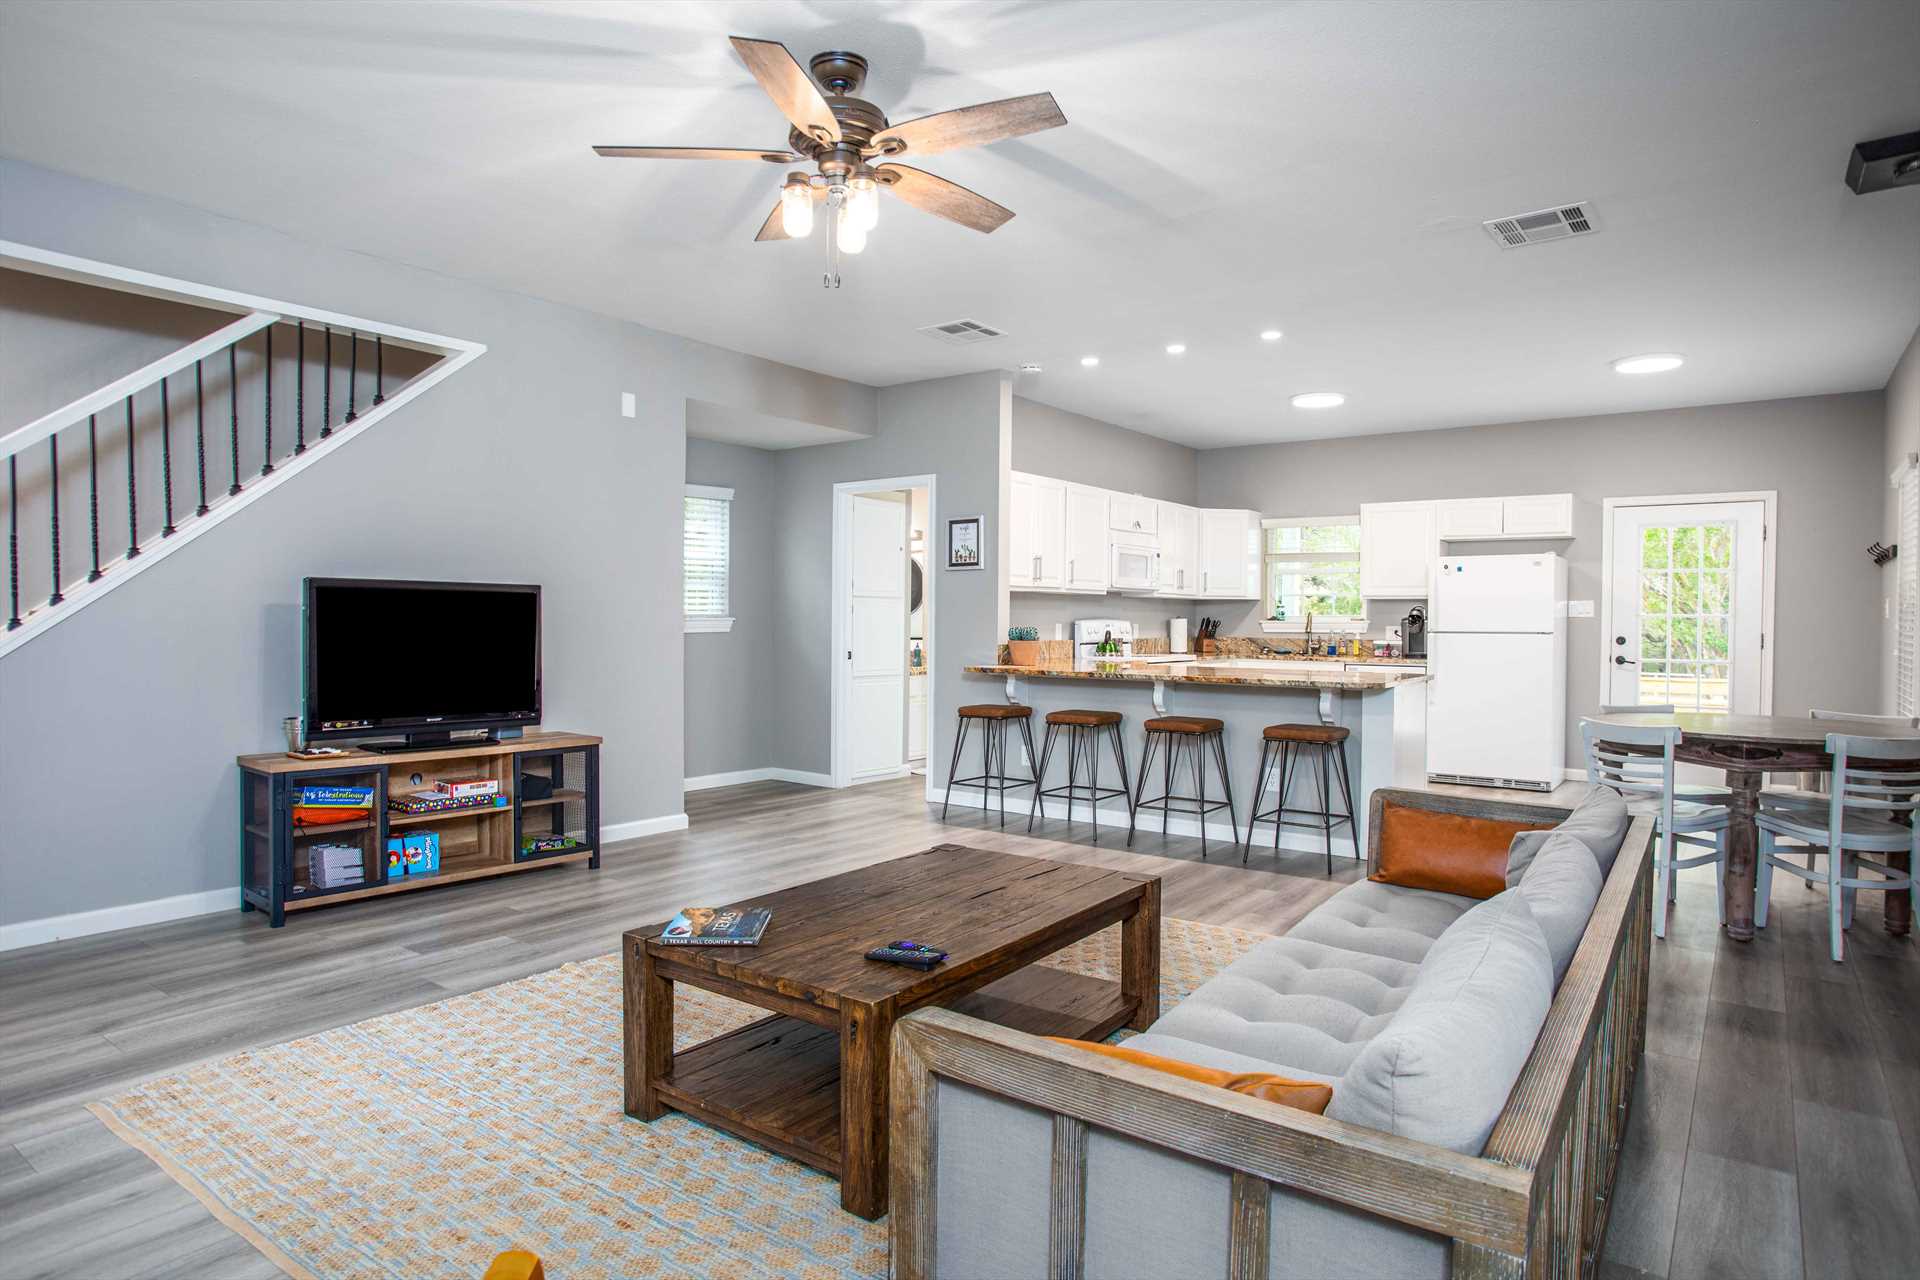                                                 No matter where you are on the main floor, you'll always be part of the fun and conversation, thanks to the bright and airy open-floor design here!